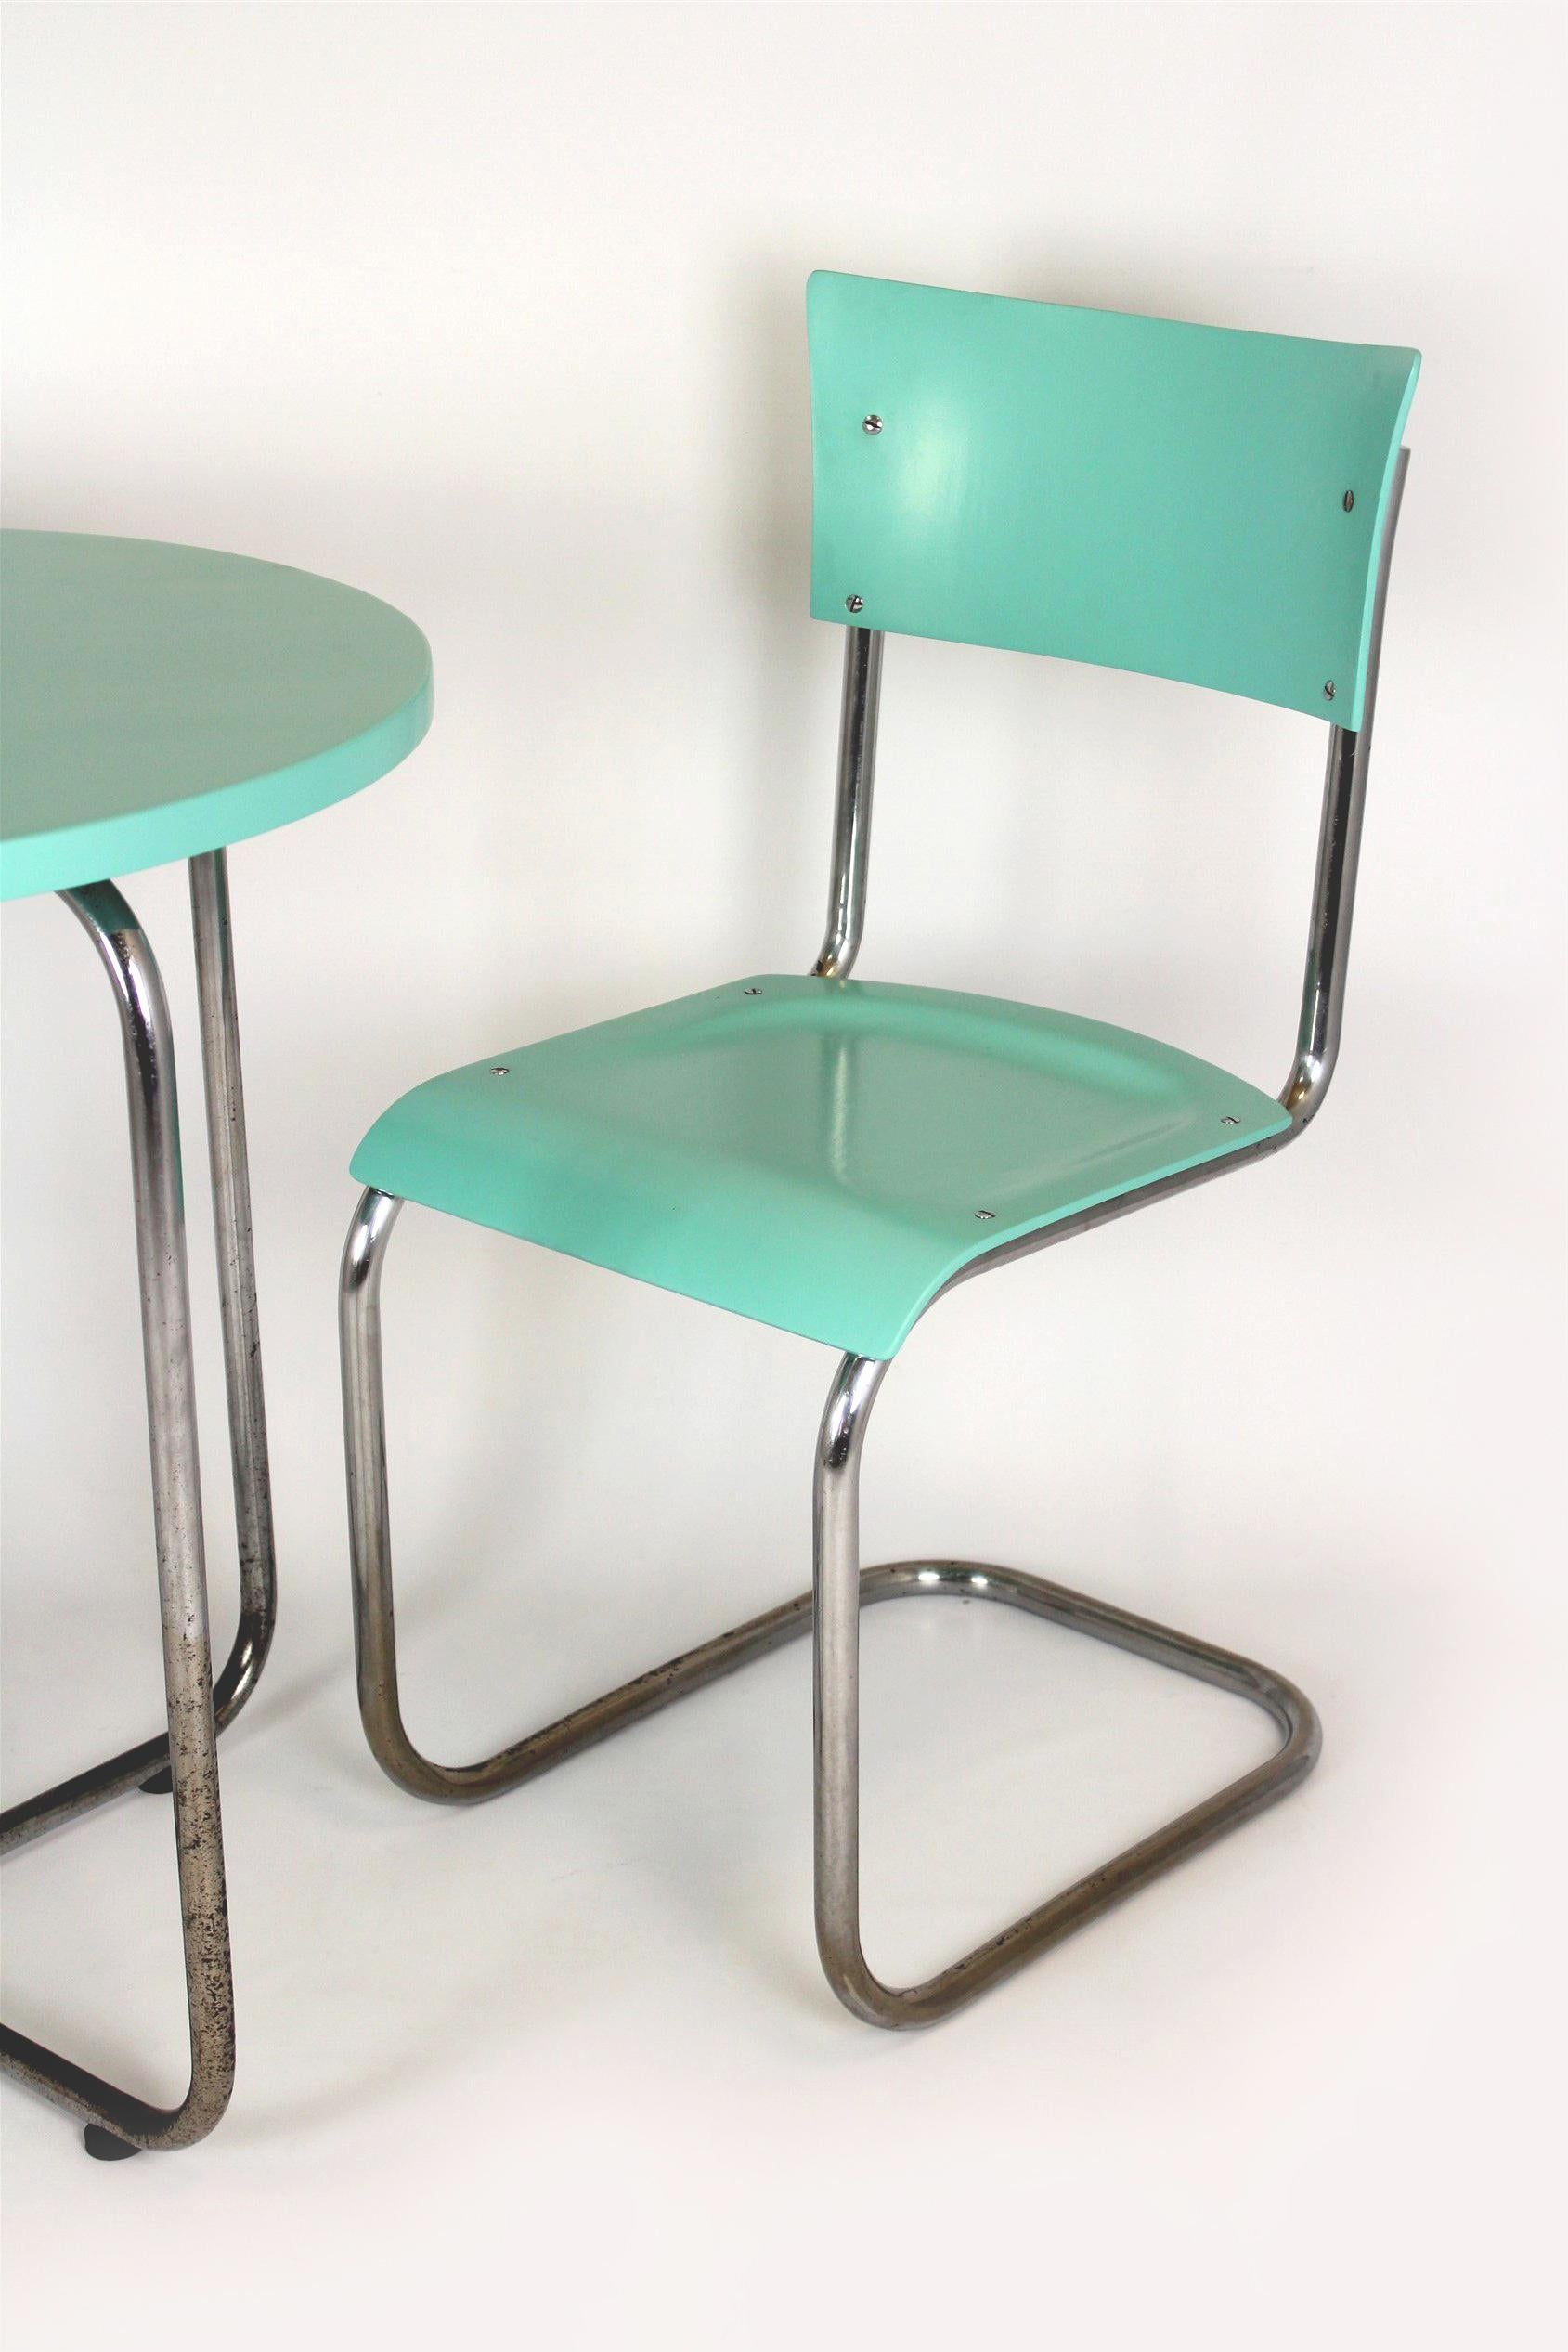 Bauhaus Tubular Steel Set, Round Table and Chair by Mart Stam, 1930s For Sale 3